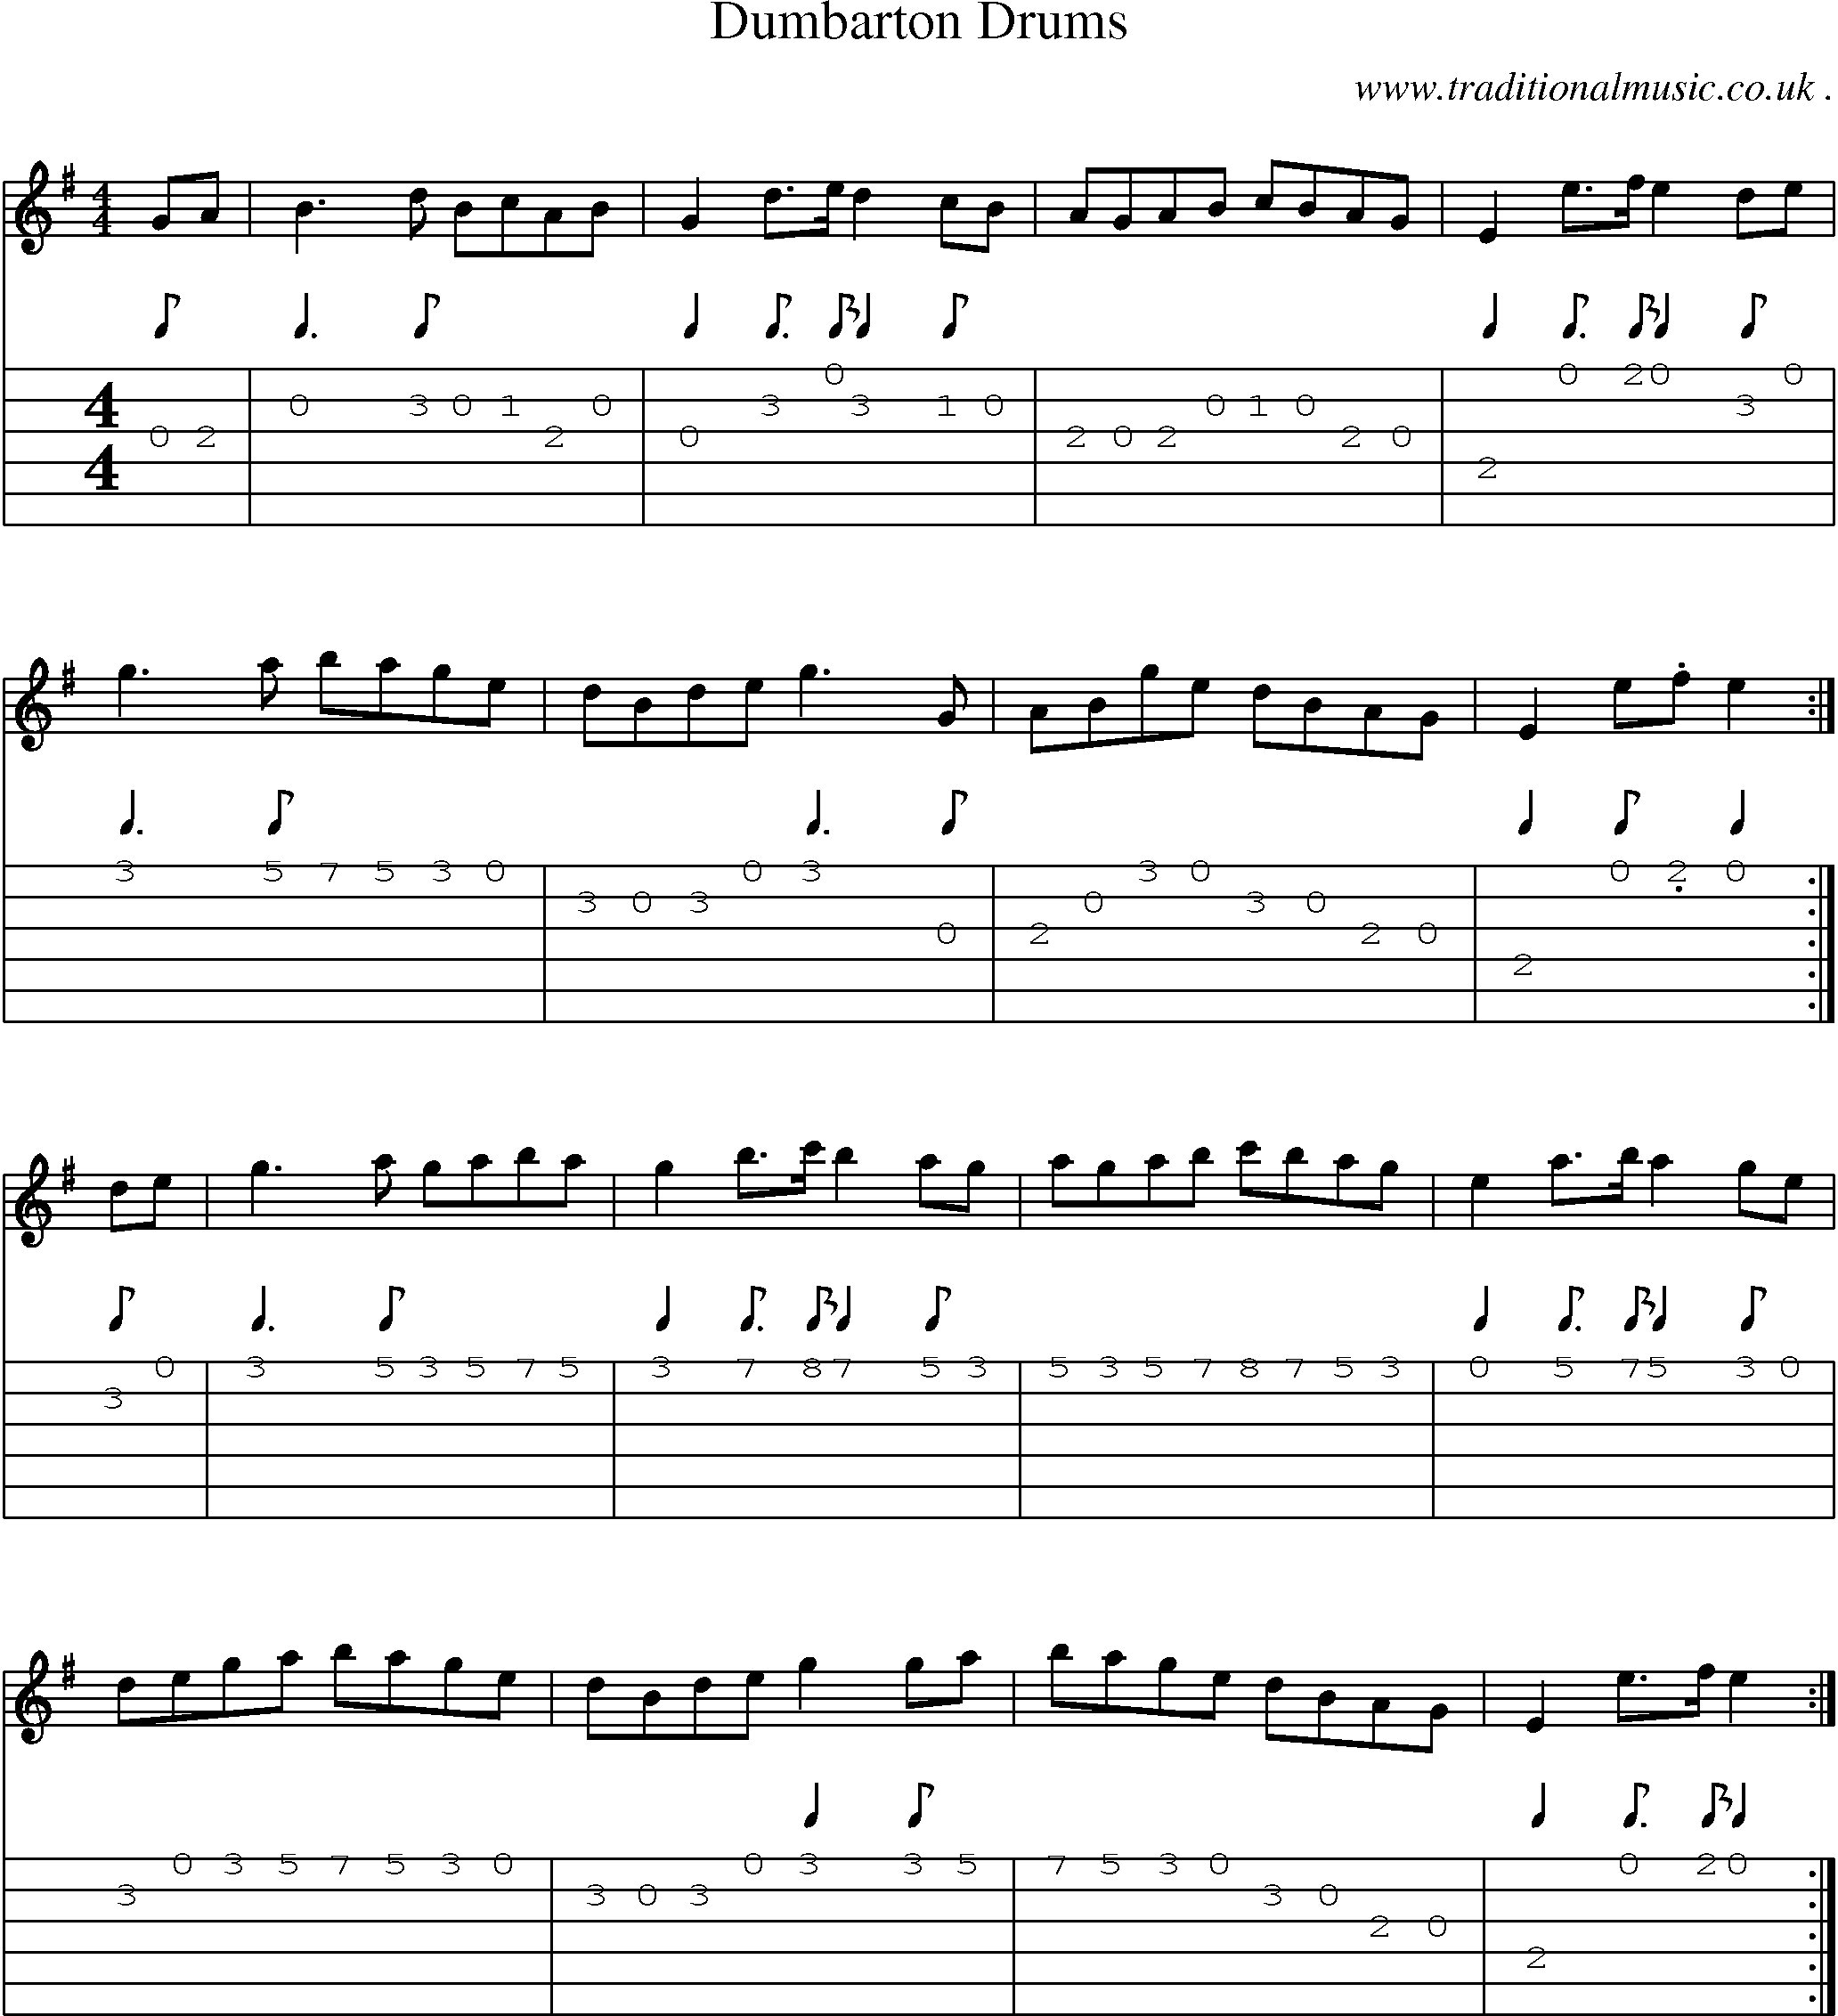 Sheet-music  score, Chords and Guitar Tabs for Dumbarton Drums